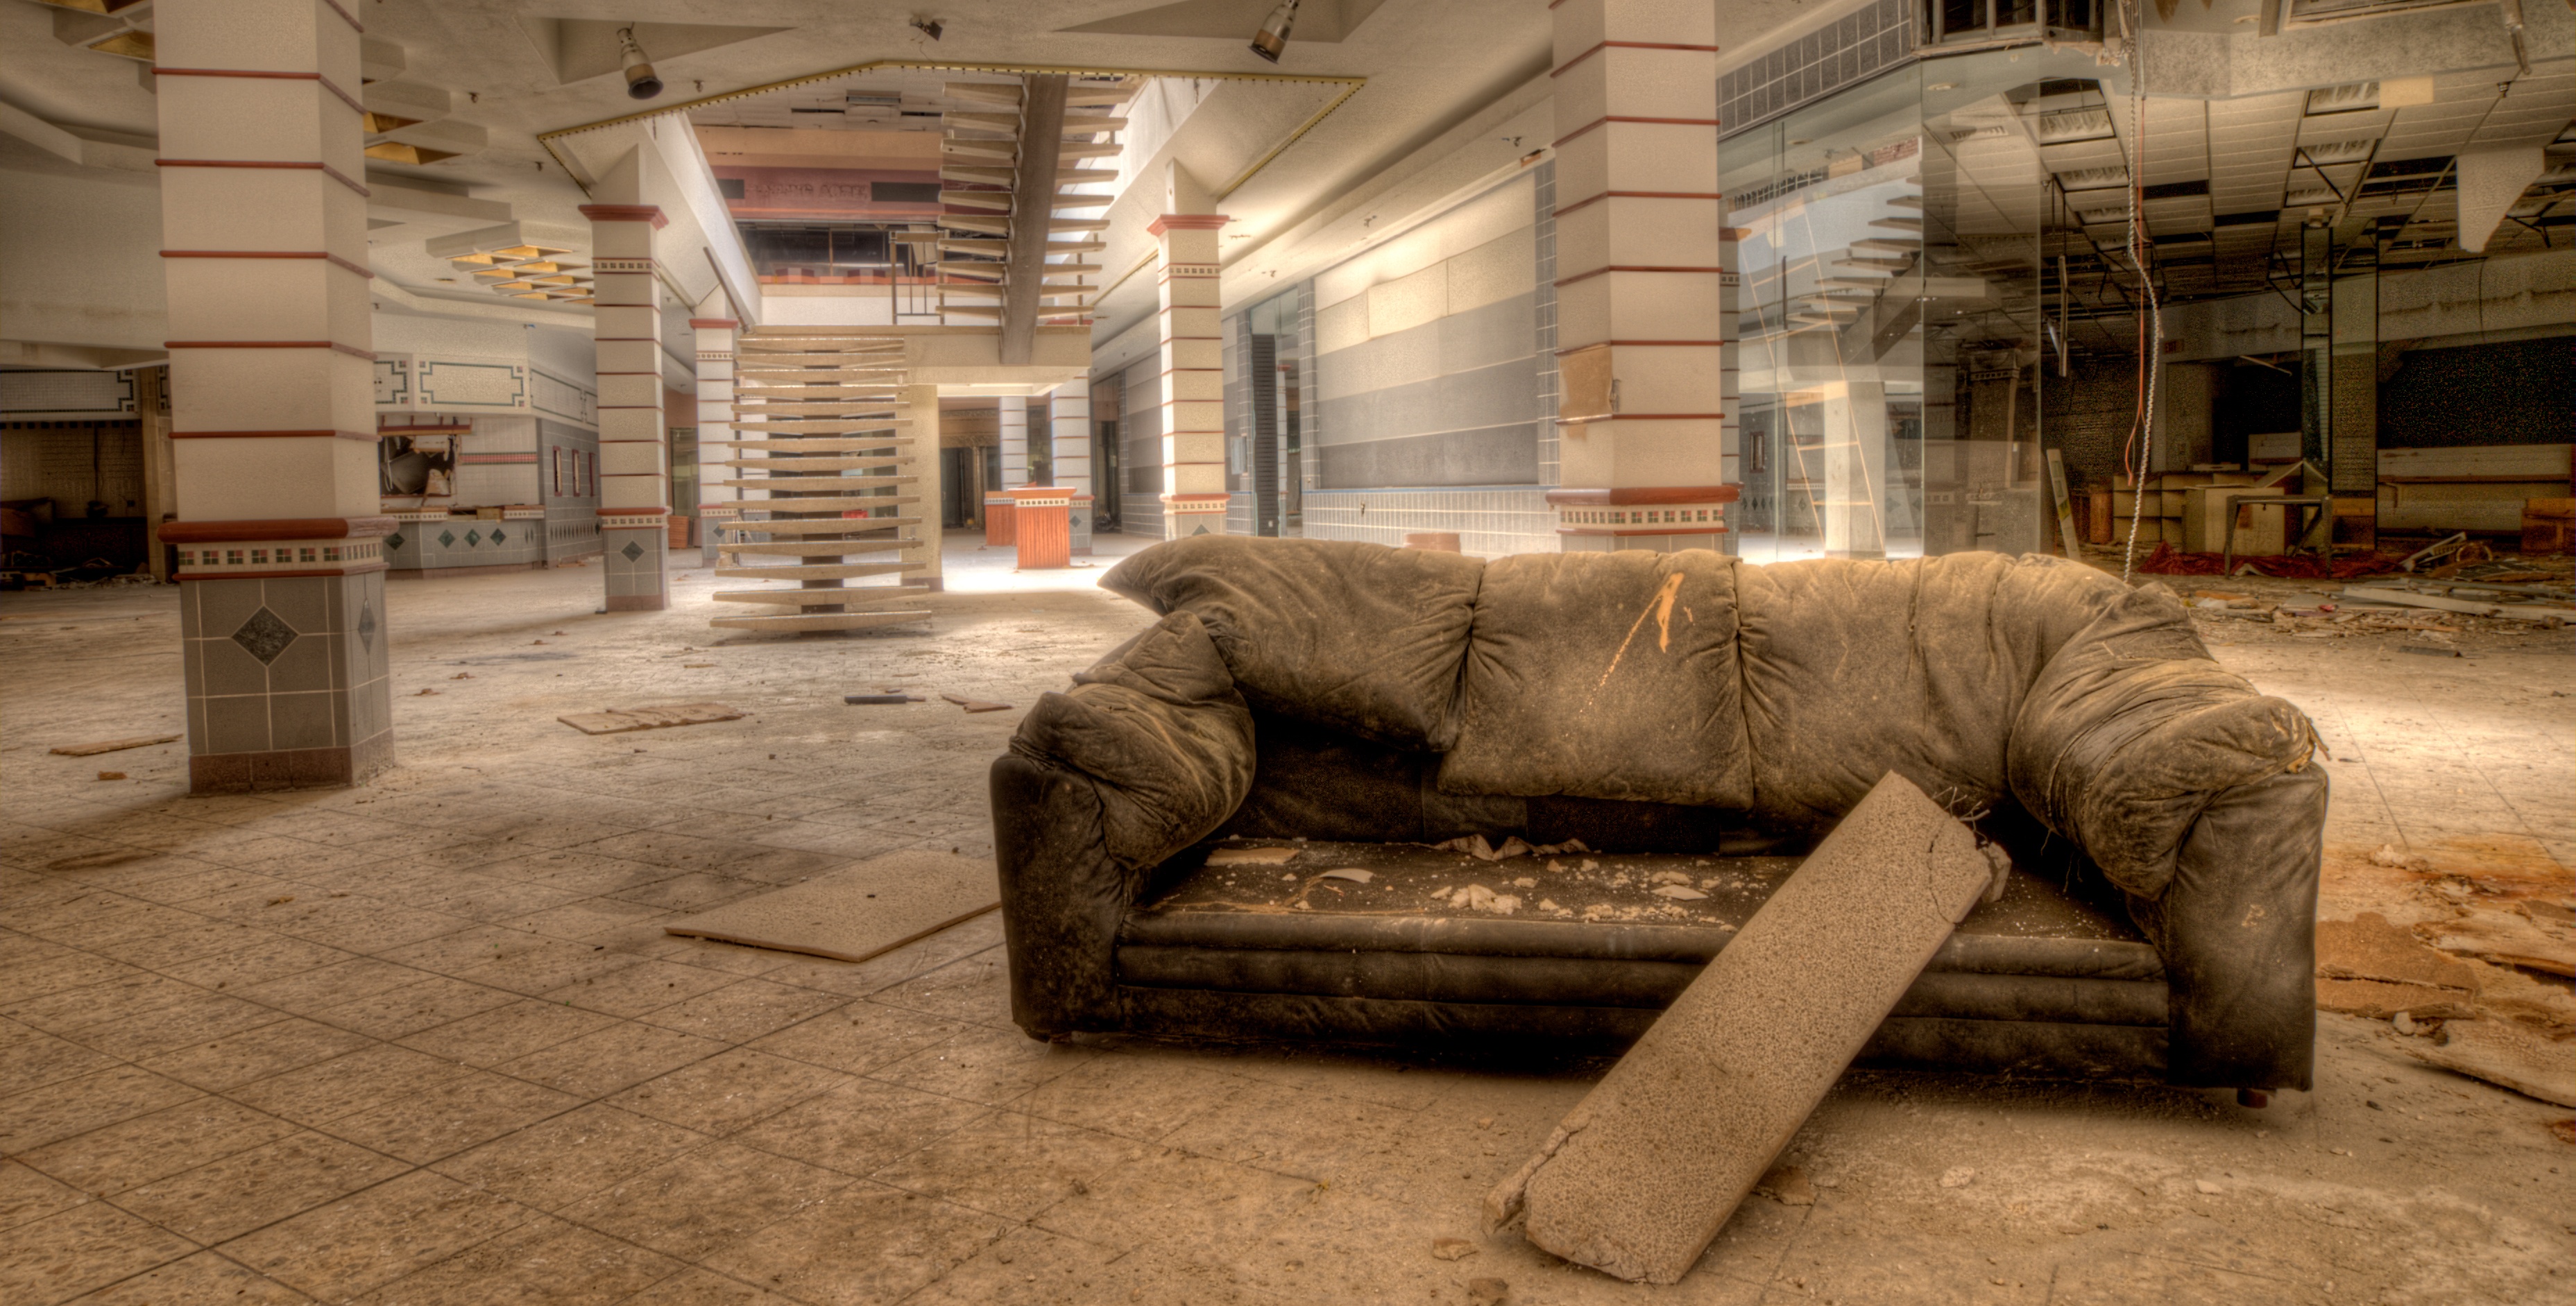 The Rolling Acres Mall in Akron, Ohio, once had more than 140 stores, but it closed in 2013 and was demolished in 2016. 